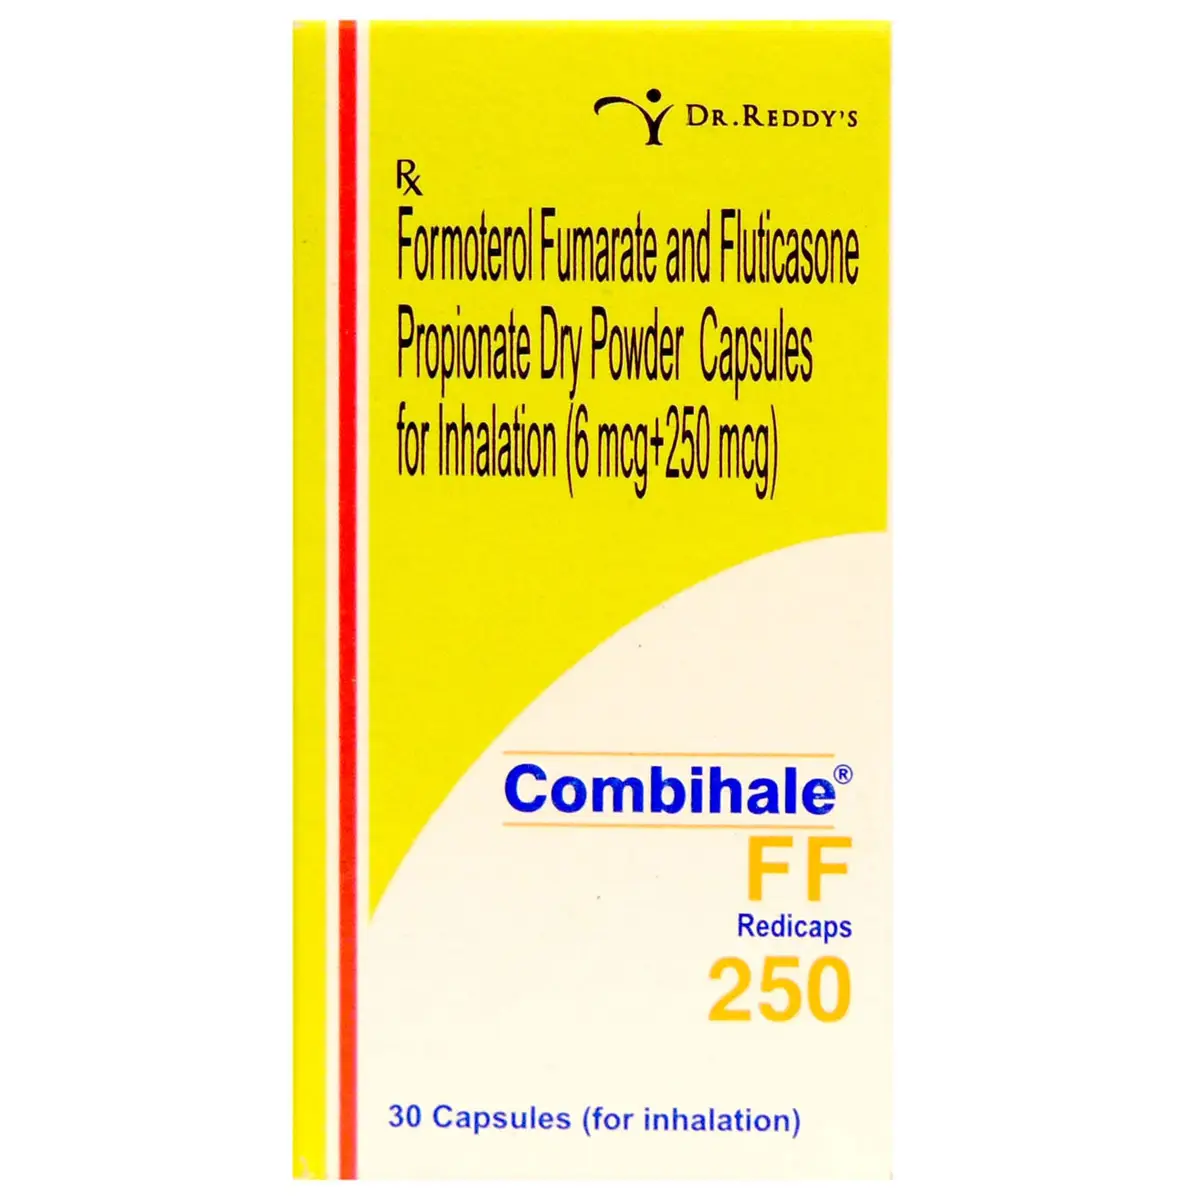 COMBIHALE FF